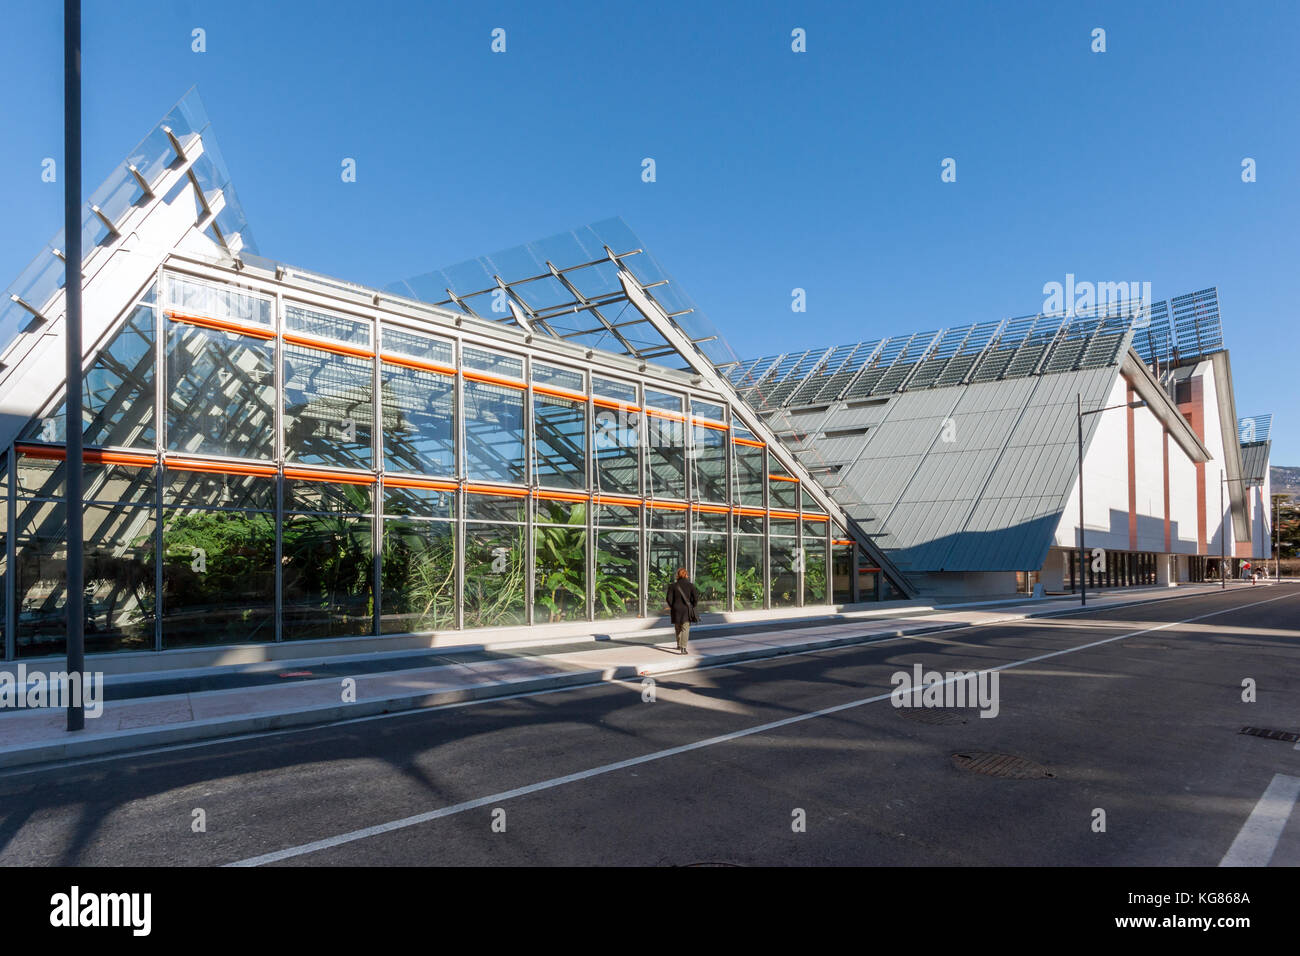 MUSE Museo delle Scienze Science Museum in Trento, northern Italy, designed in 2013 by Renzo Piano Building Workshop, exterior view of the greenhouse Stock Photo